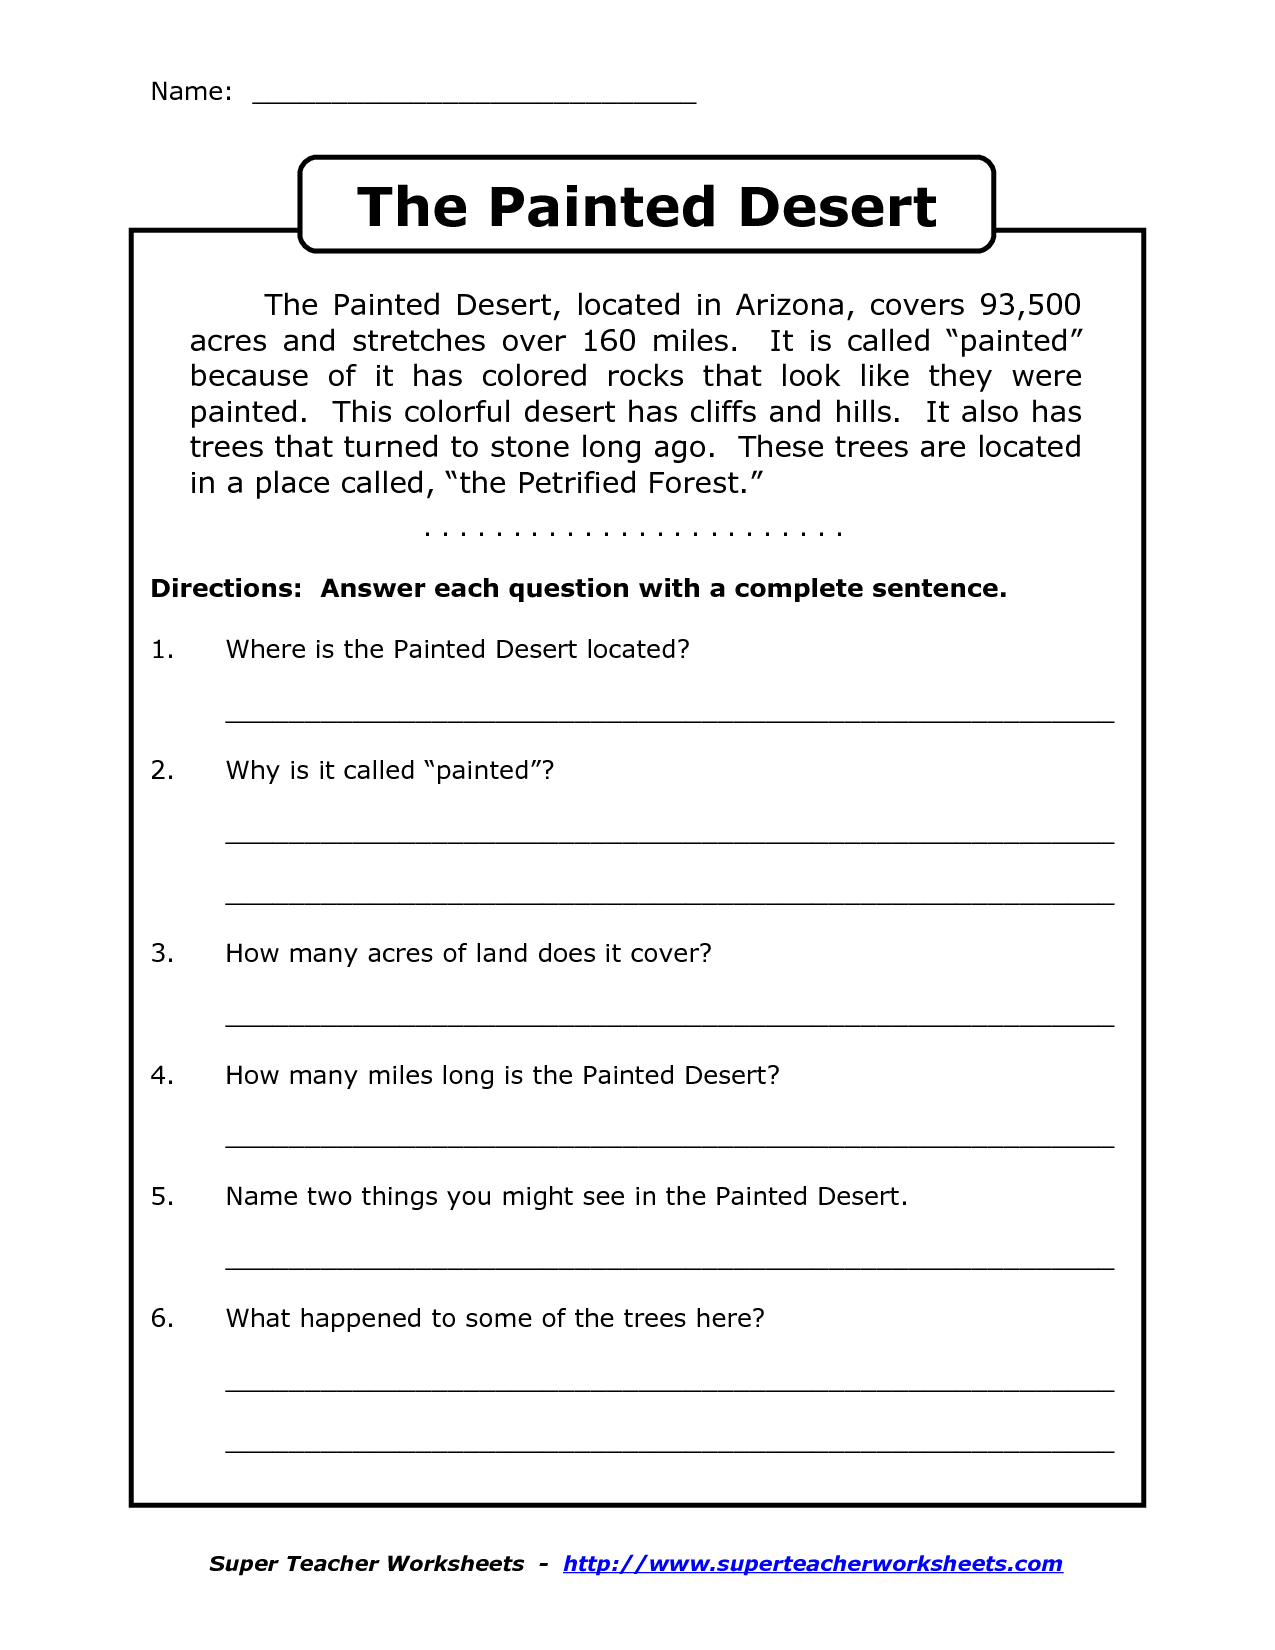 7 Best Images of Writing 4th Grade Reading Worksheets ...